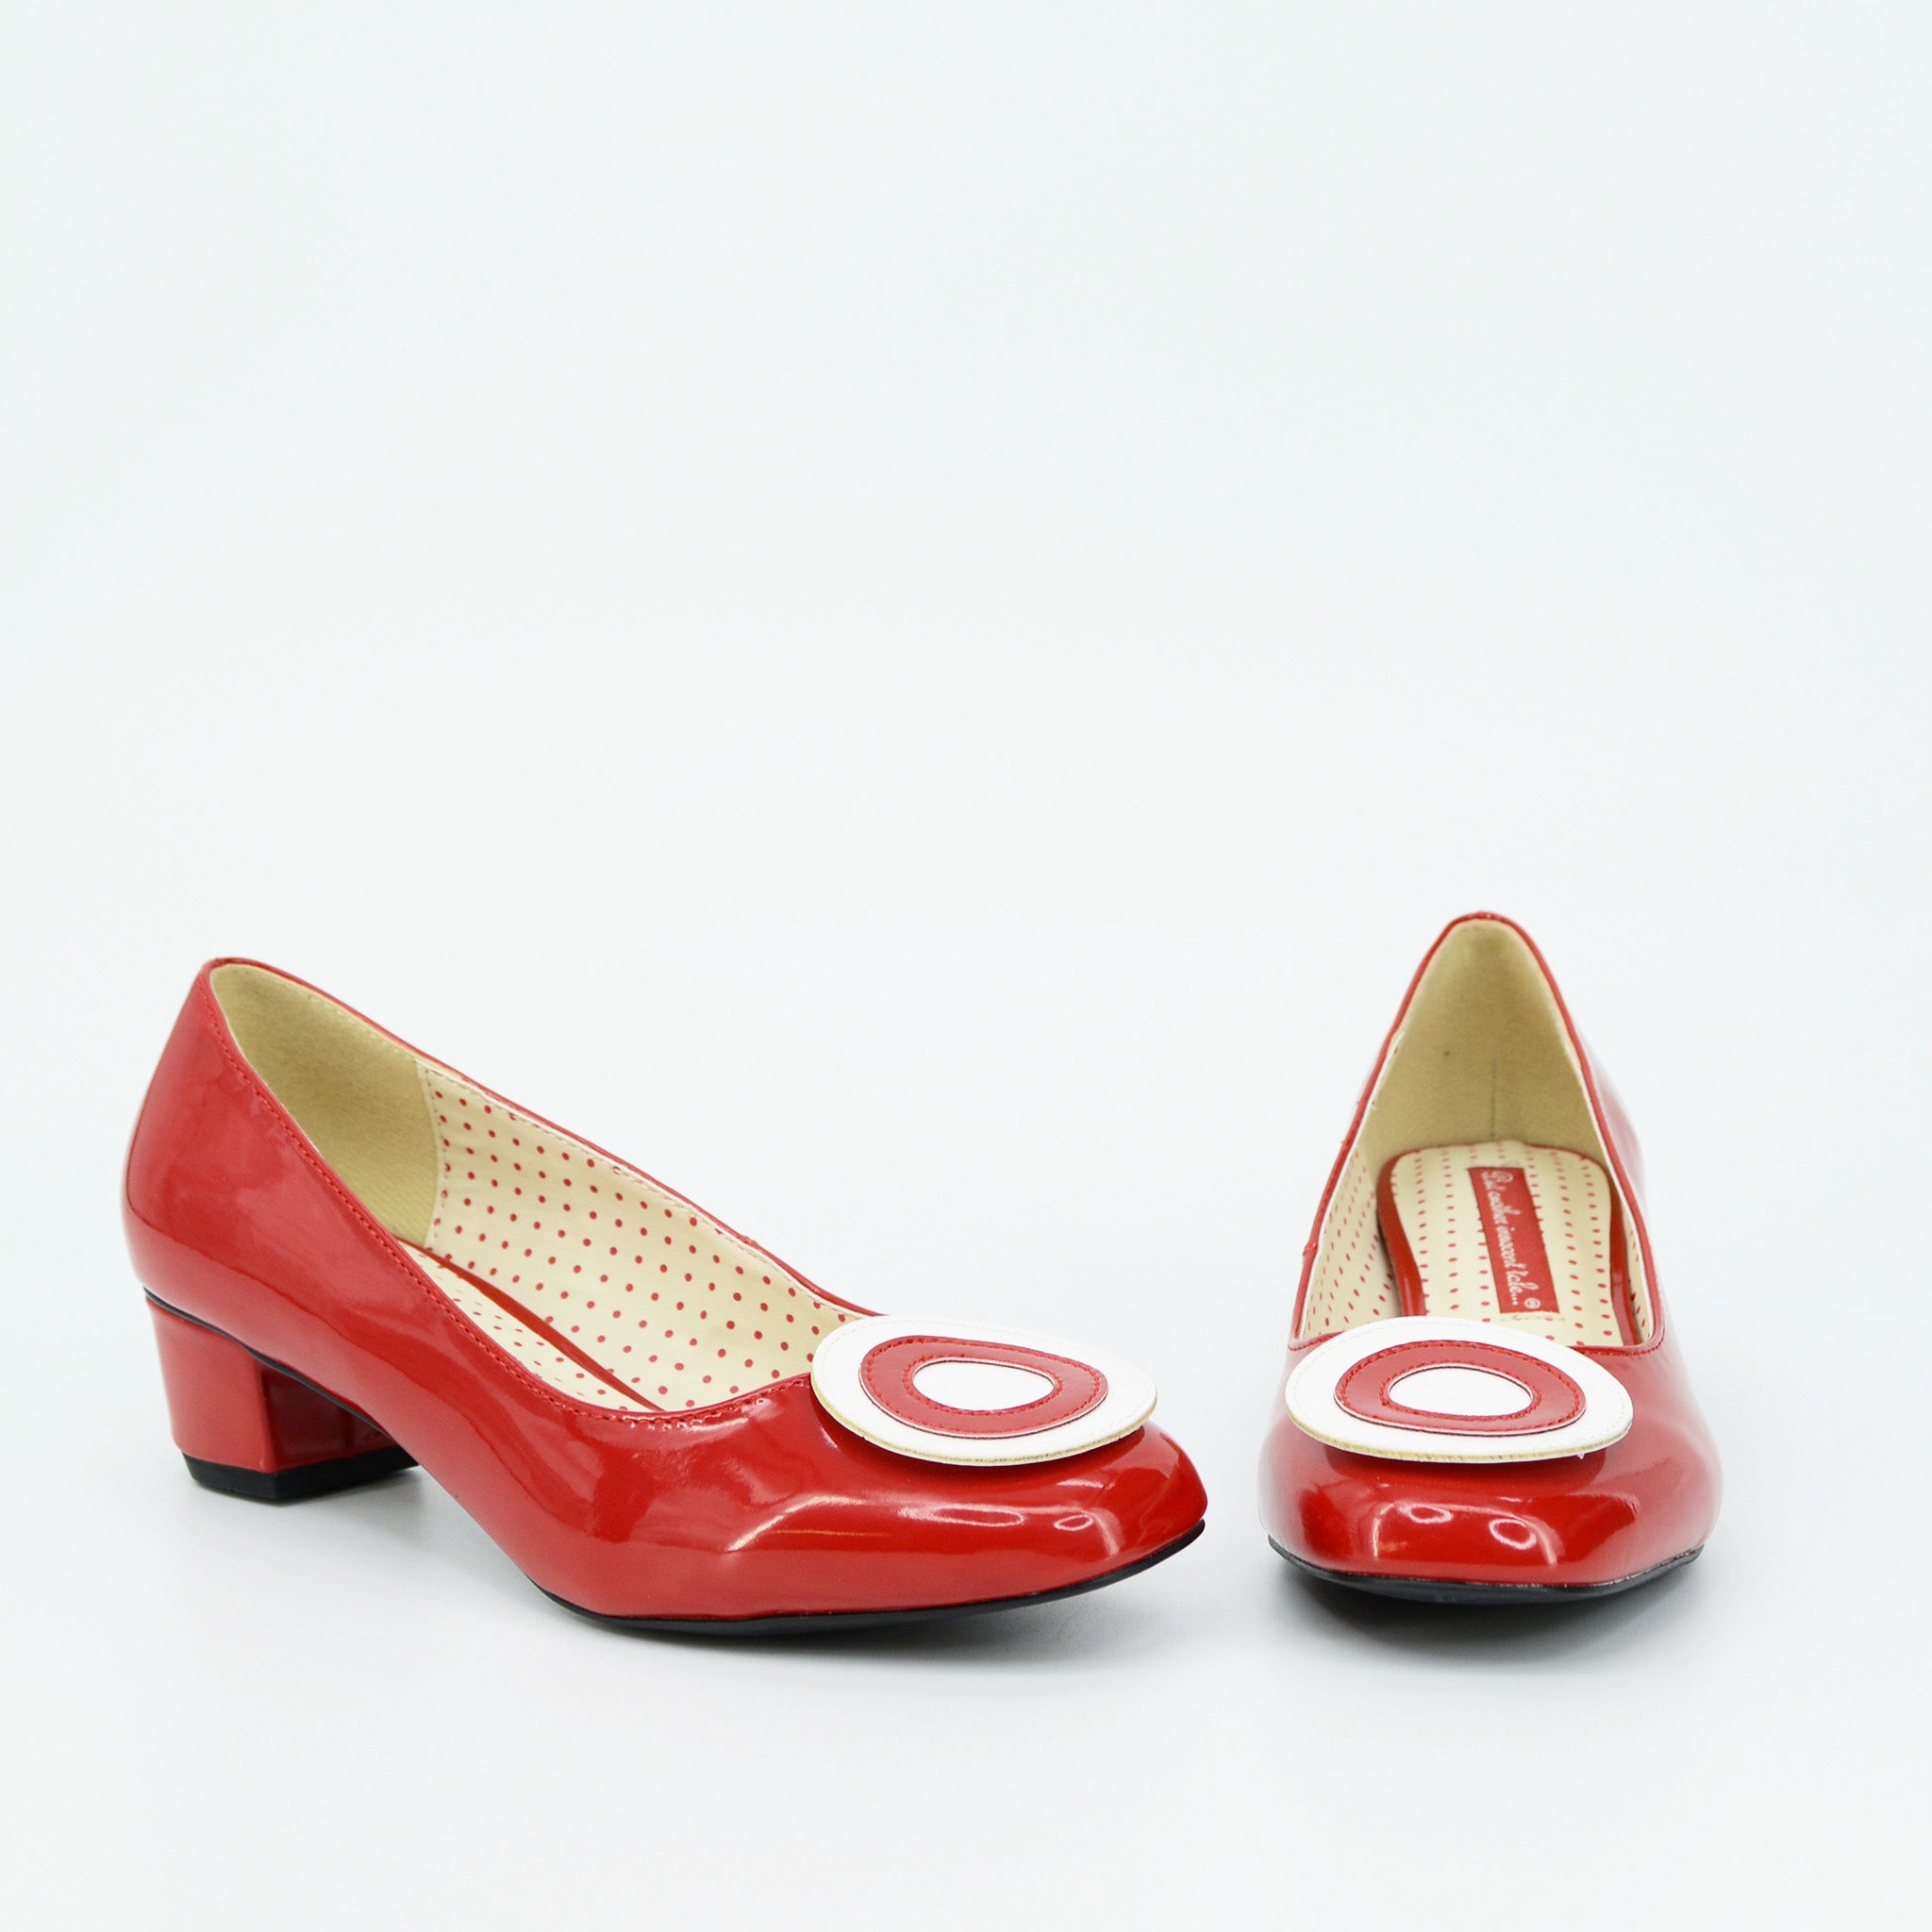 B.A.I.T. 60s Fawn T-Strap Pumps in Toffee